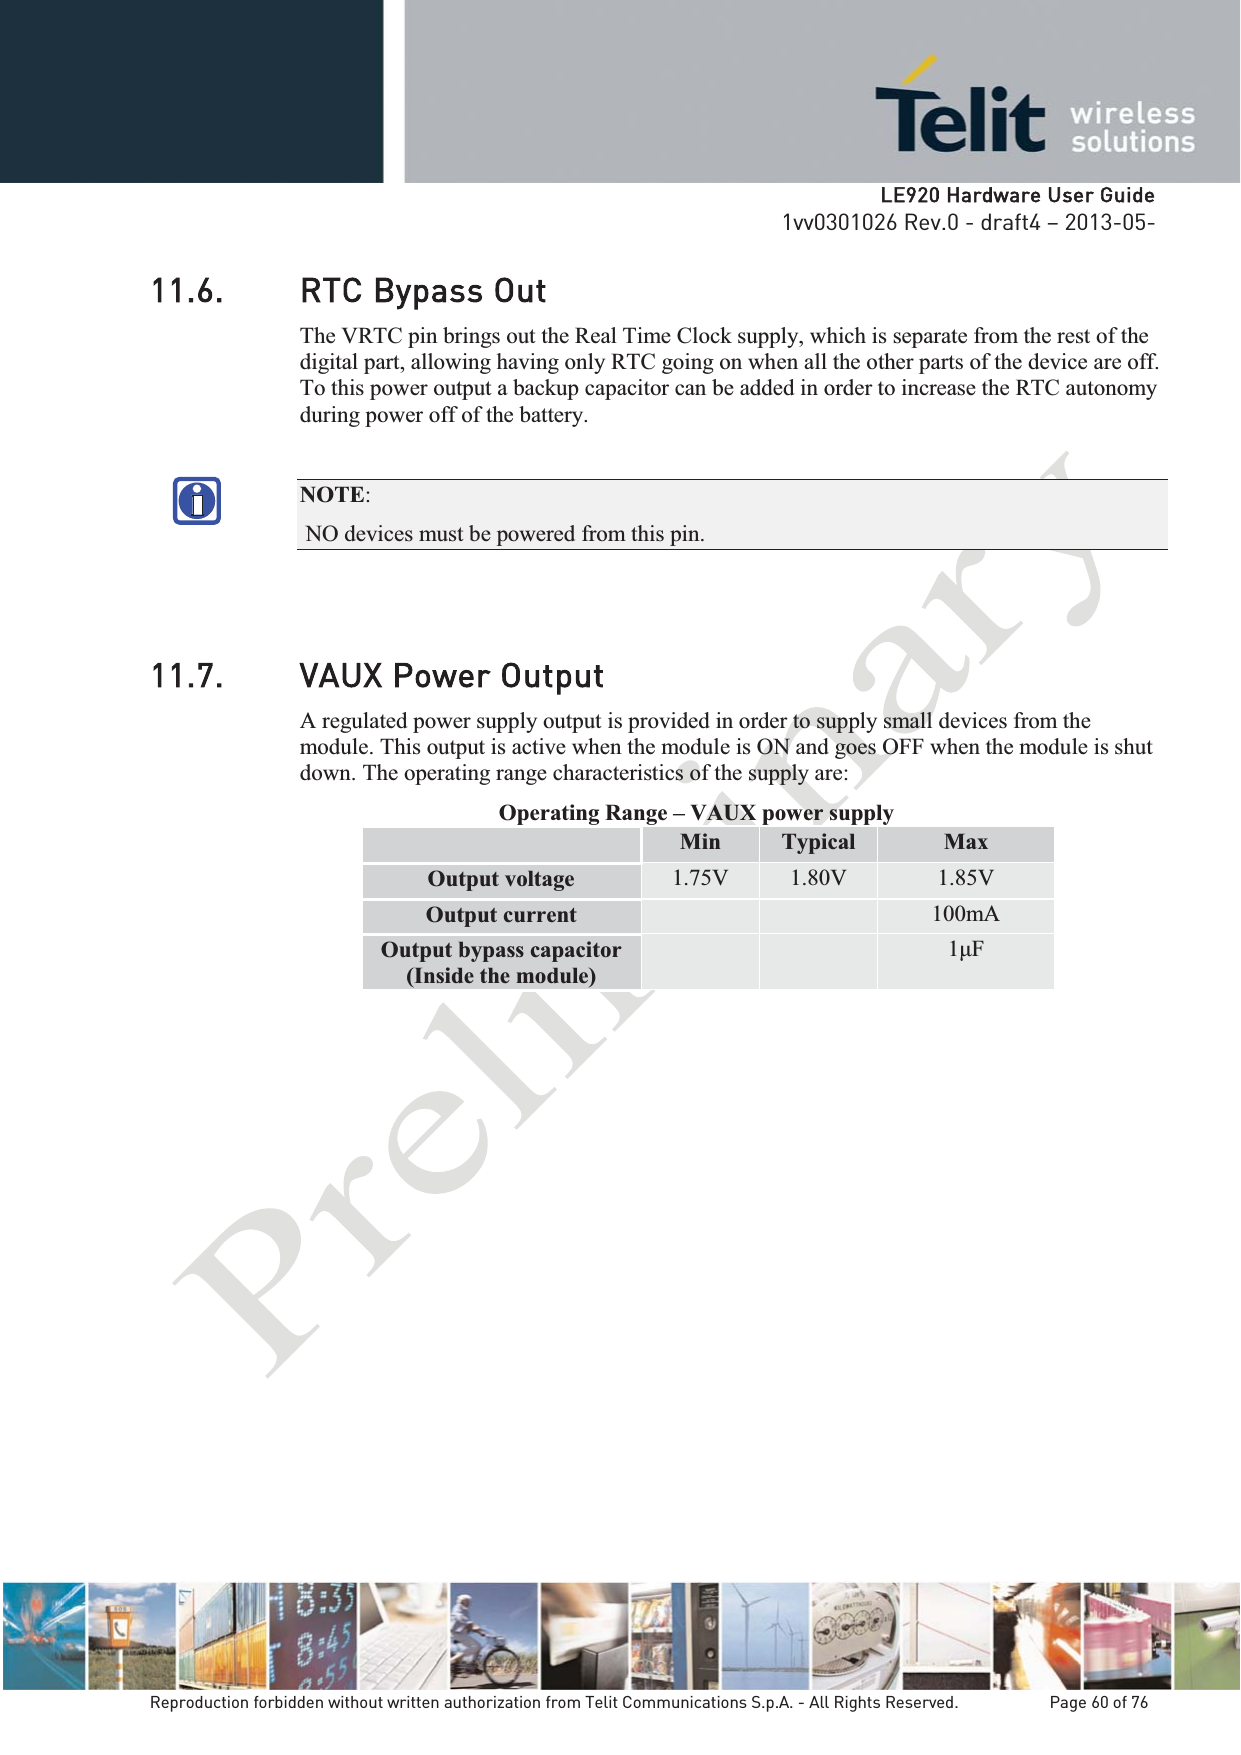   LLE920 Hardware User Guide1vv0301026 Rev.0 - draft4 – 2013-05-Reproduction forbidden without written authorization from Telit Communications S.p.A. - All Rights Reserved.    Page 60 of 76 11.6. RTC Bypass Out The VRTC pin brings out the Real Time Clock supply, which is separate from the rest of the digital part, allowing having only RTC going on when all the other parts of the device are off. To this power output a backup capacitor can be added in order to increase the RTC autonomy during power off of the battery.  NOTE: NO devices must be powered from this pin. 11.7. VAUX Power Output A regulated power supply output is provided in order to supply small devices from the module. This output is active when the module is ON and goes OFF when the module is shut down. The operating range characteristics of the supply are: Operating Range – VAUX power supply  Min  Typical  Max Output voltage  1.75V  1.80V  1.85V Output current    100mA Output bypass capacitor (Inside the module)  1 